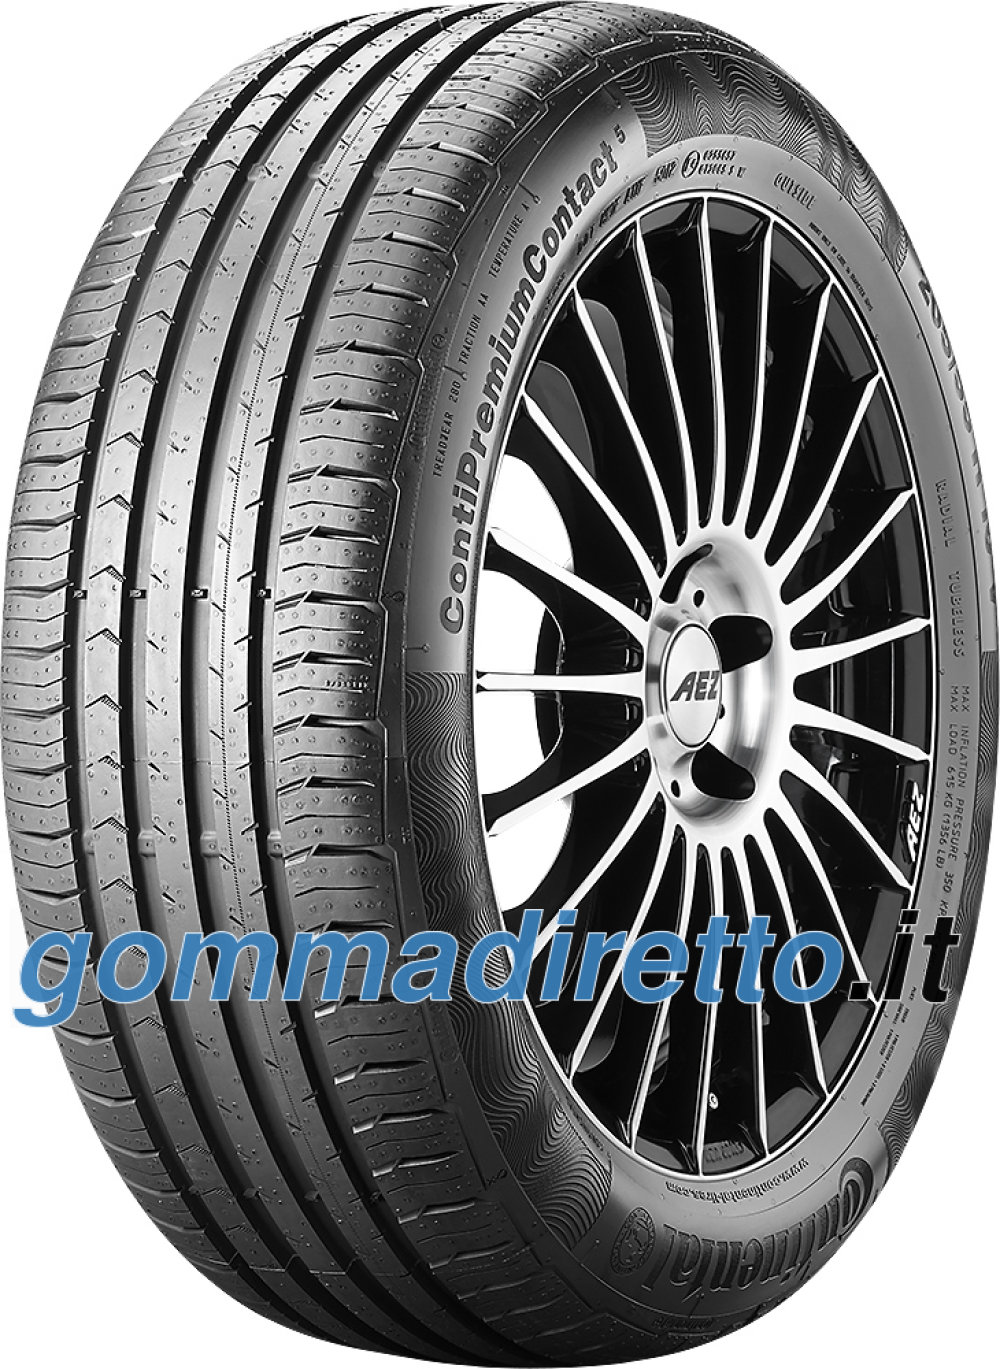 Image of Continental ContiPremiumContact 5 ( 225/65 R17 102V SUV )